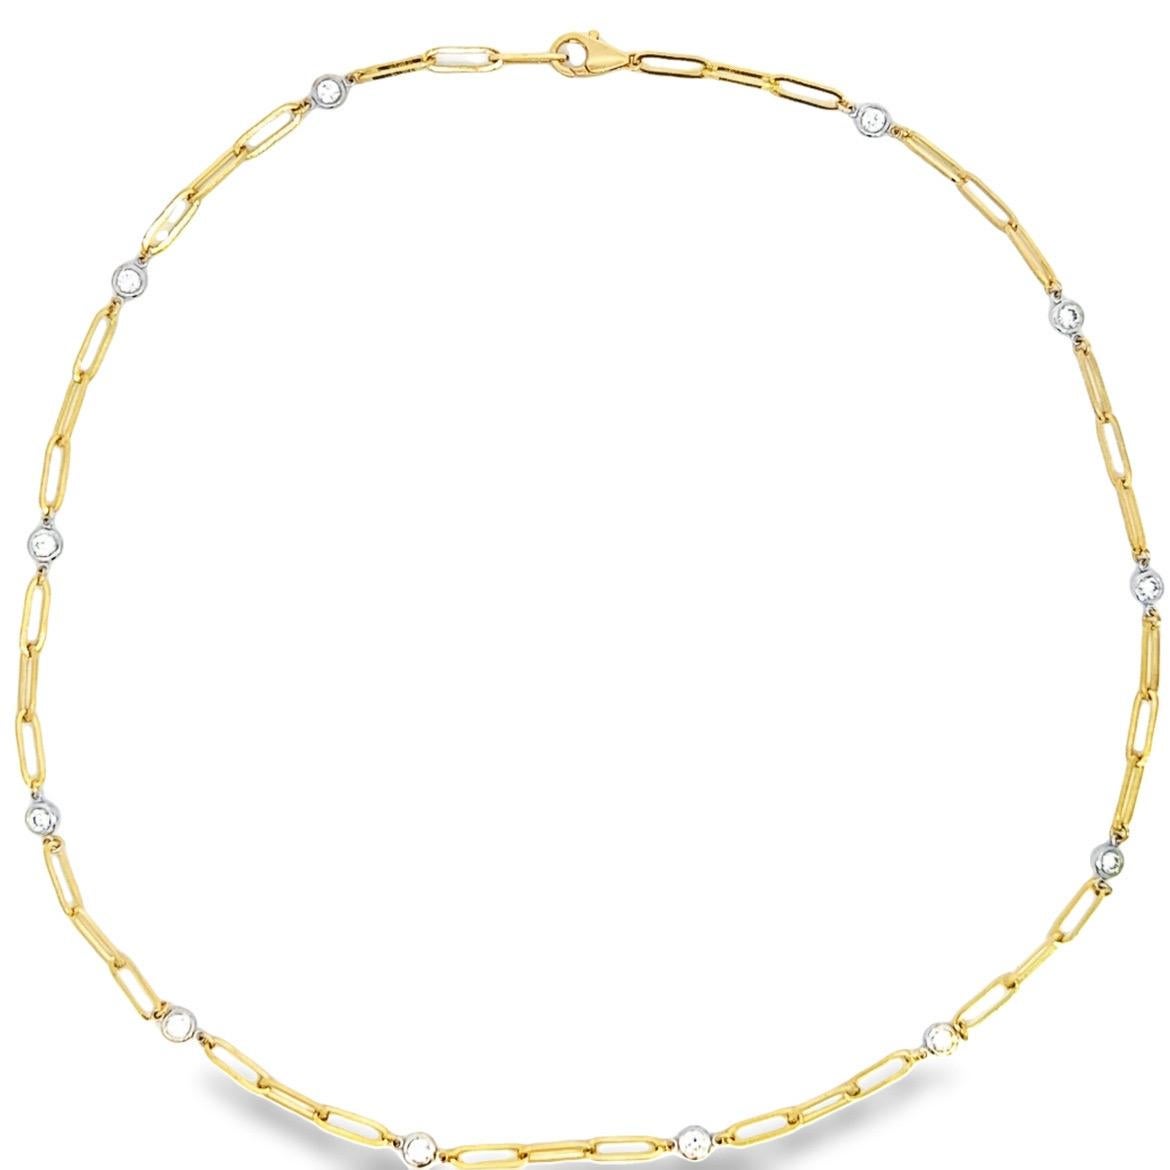 Diamond By The Yards Necklace In 14k Two-Tone gold - Natural - Paper-Clip Chain
12 Natural Full Brilliant Cut Diamonds
14k Yellow and White Gold
1.00 Total Carat Weight
MADE IN USA
Perfect Gift to wear in any occasion
